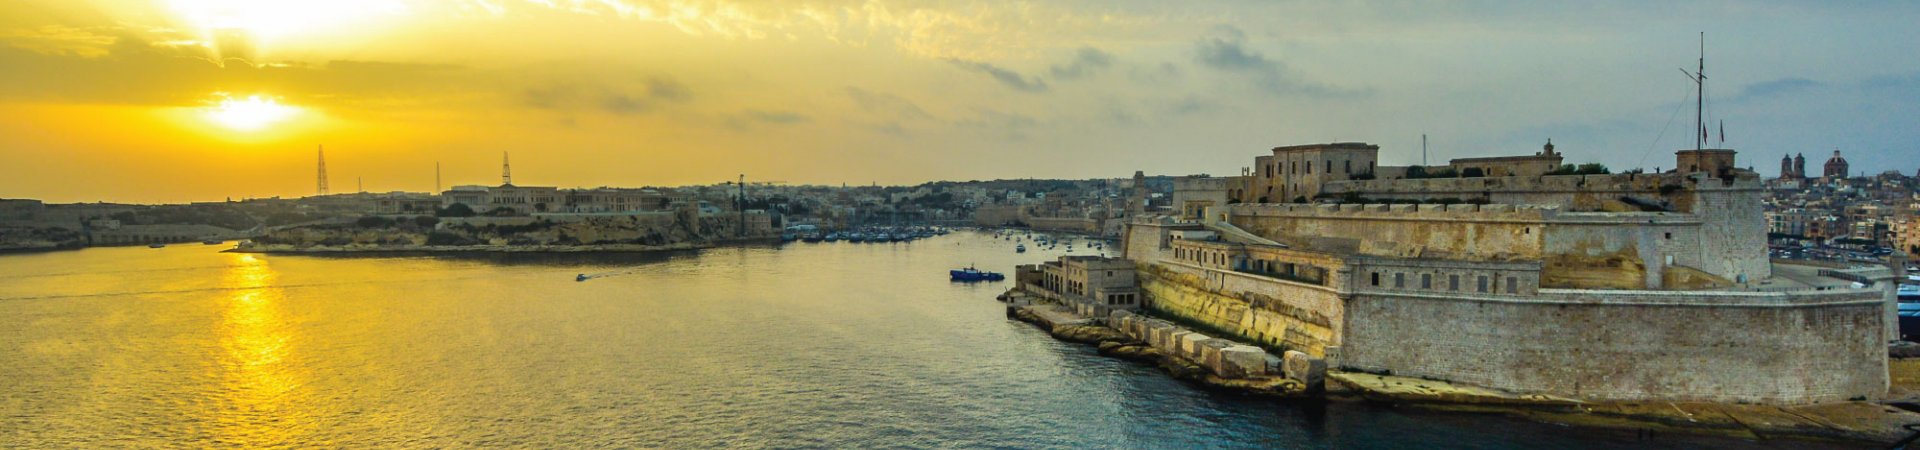 Banking and Finance Law Gauci and Partners Advocates, malta law firm, malta lawyers, legal services malta, tax services malta, corporate law malta, commercial law malta, finance law malta, marine law malta